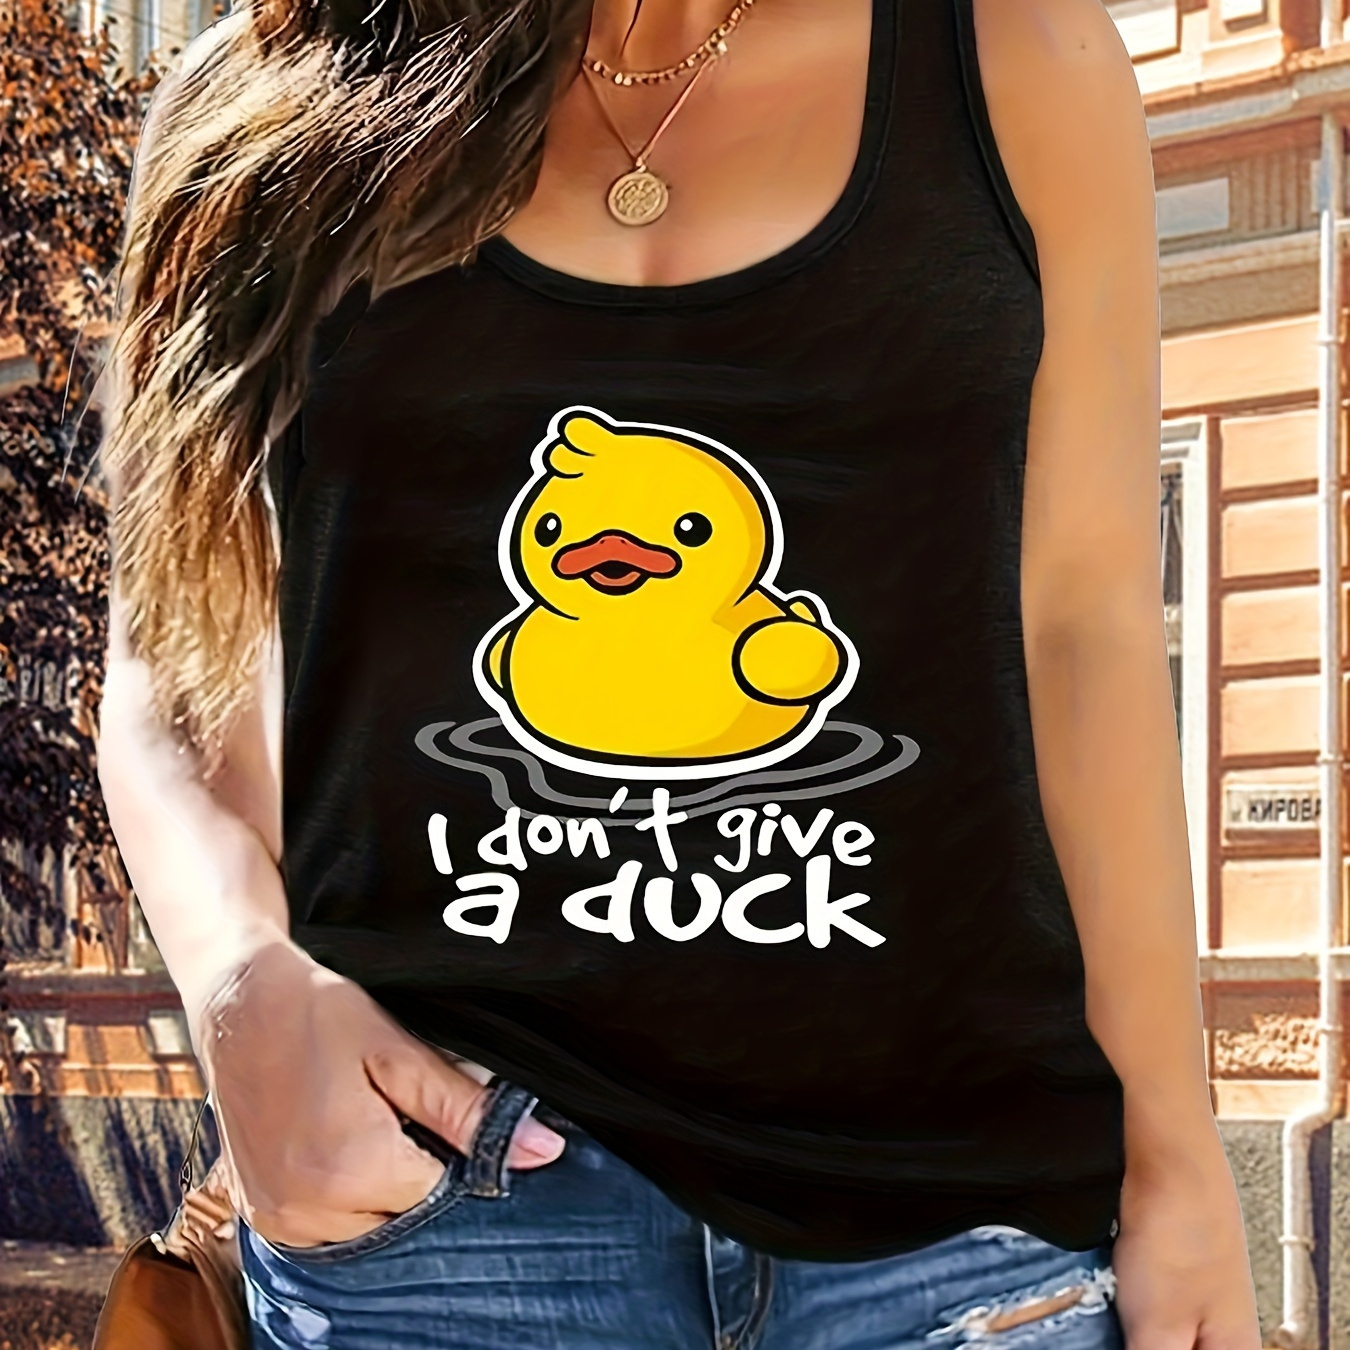 

Plus Size Duck Print Tank Top, Casual Crew Neck Sleeveless Top For Summer, Women's Plus Size Clothing